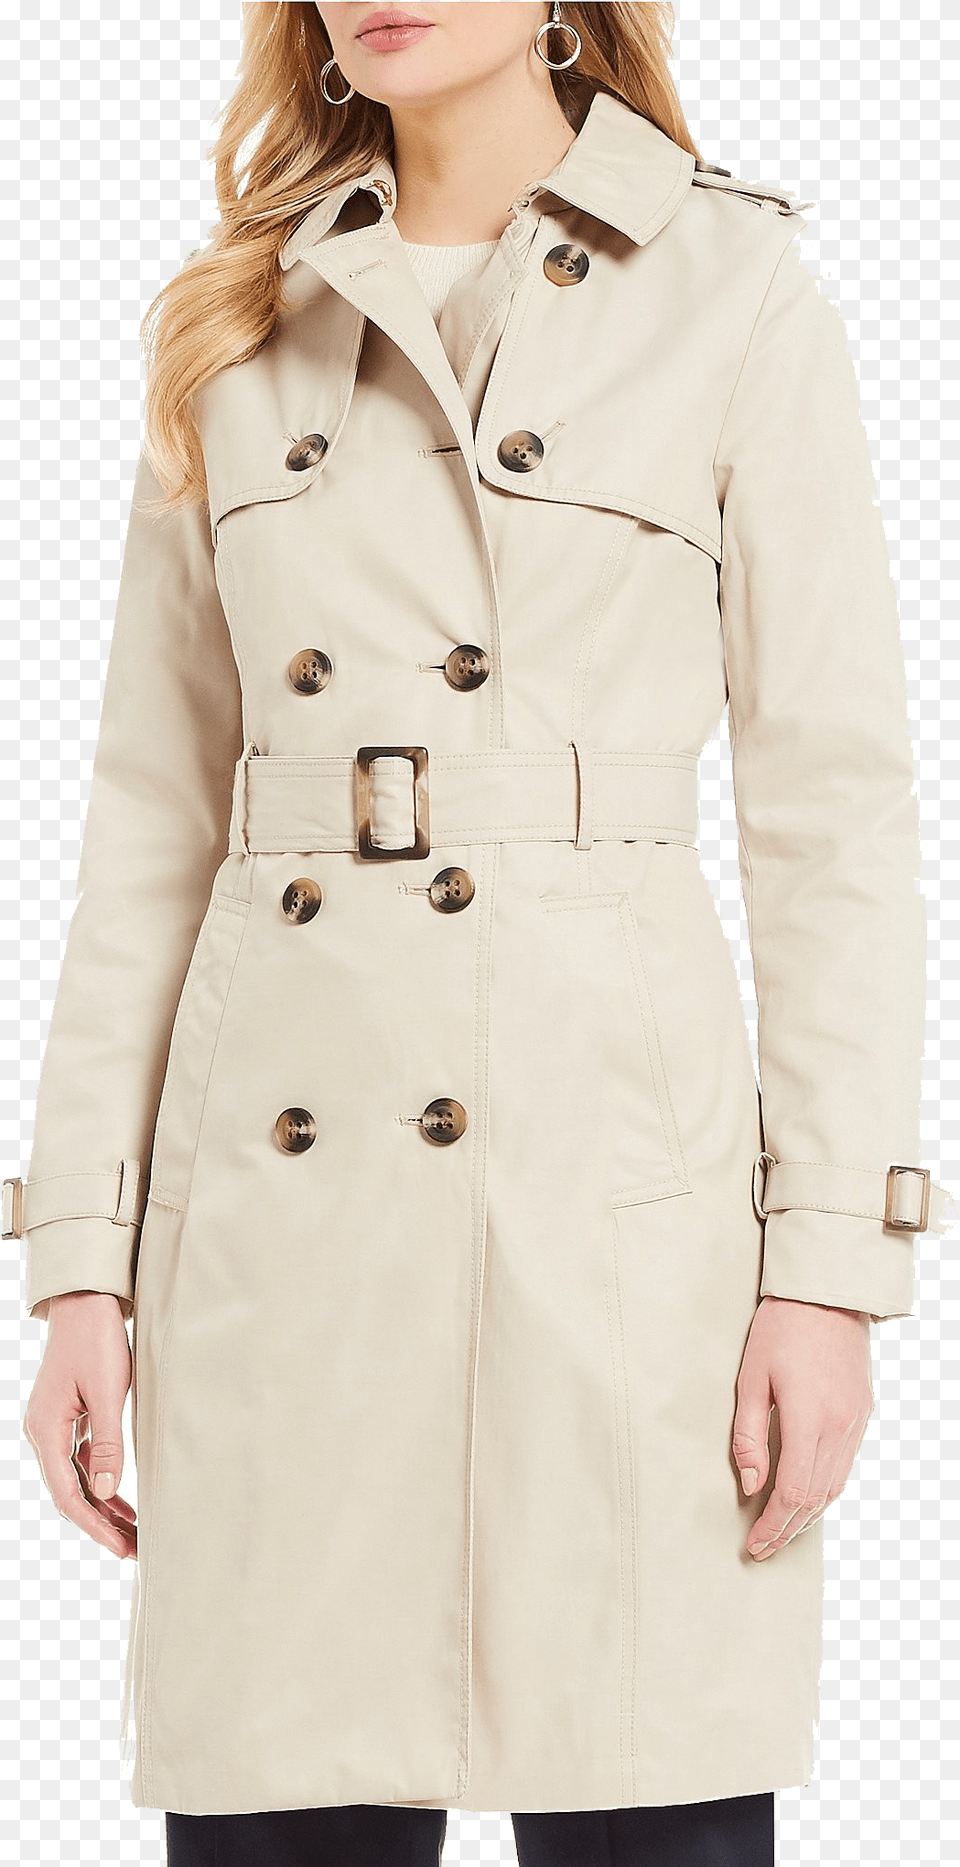 Trench Coat For Women Free Pic, Clothing, Overcoat, Trench Coat Png Image